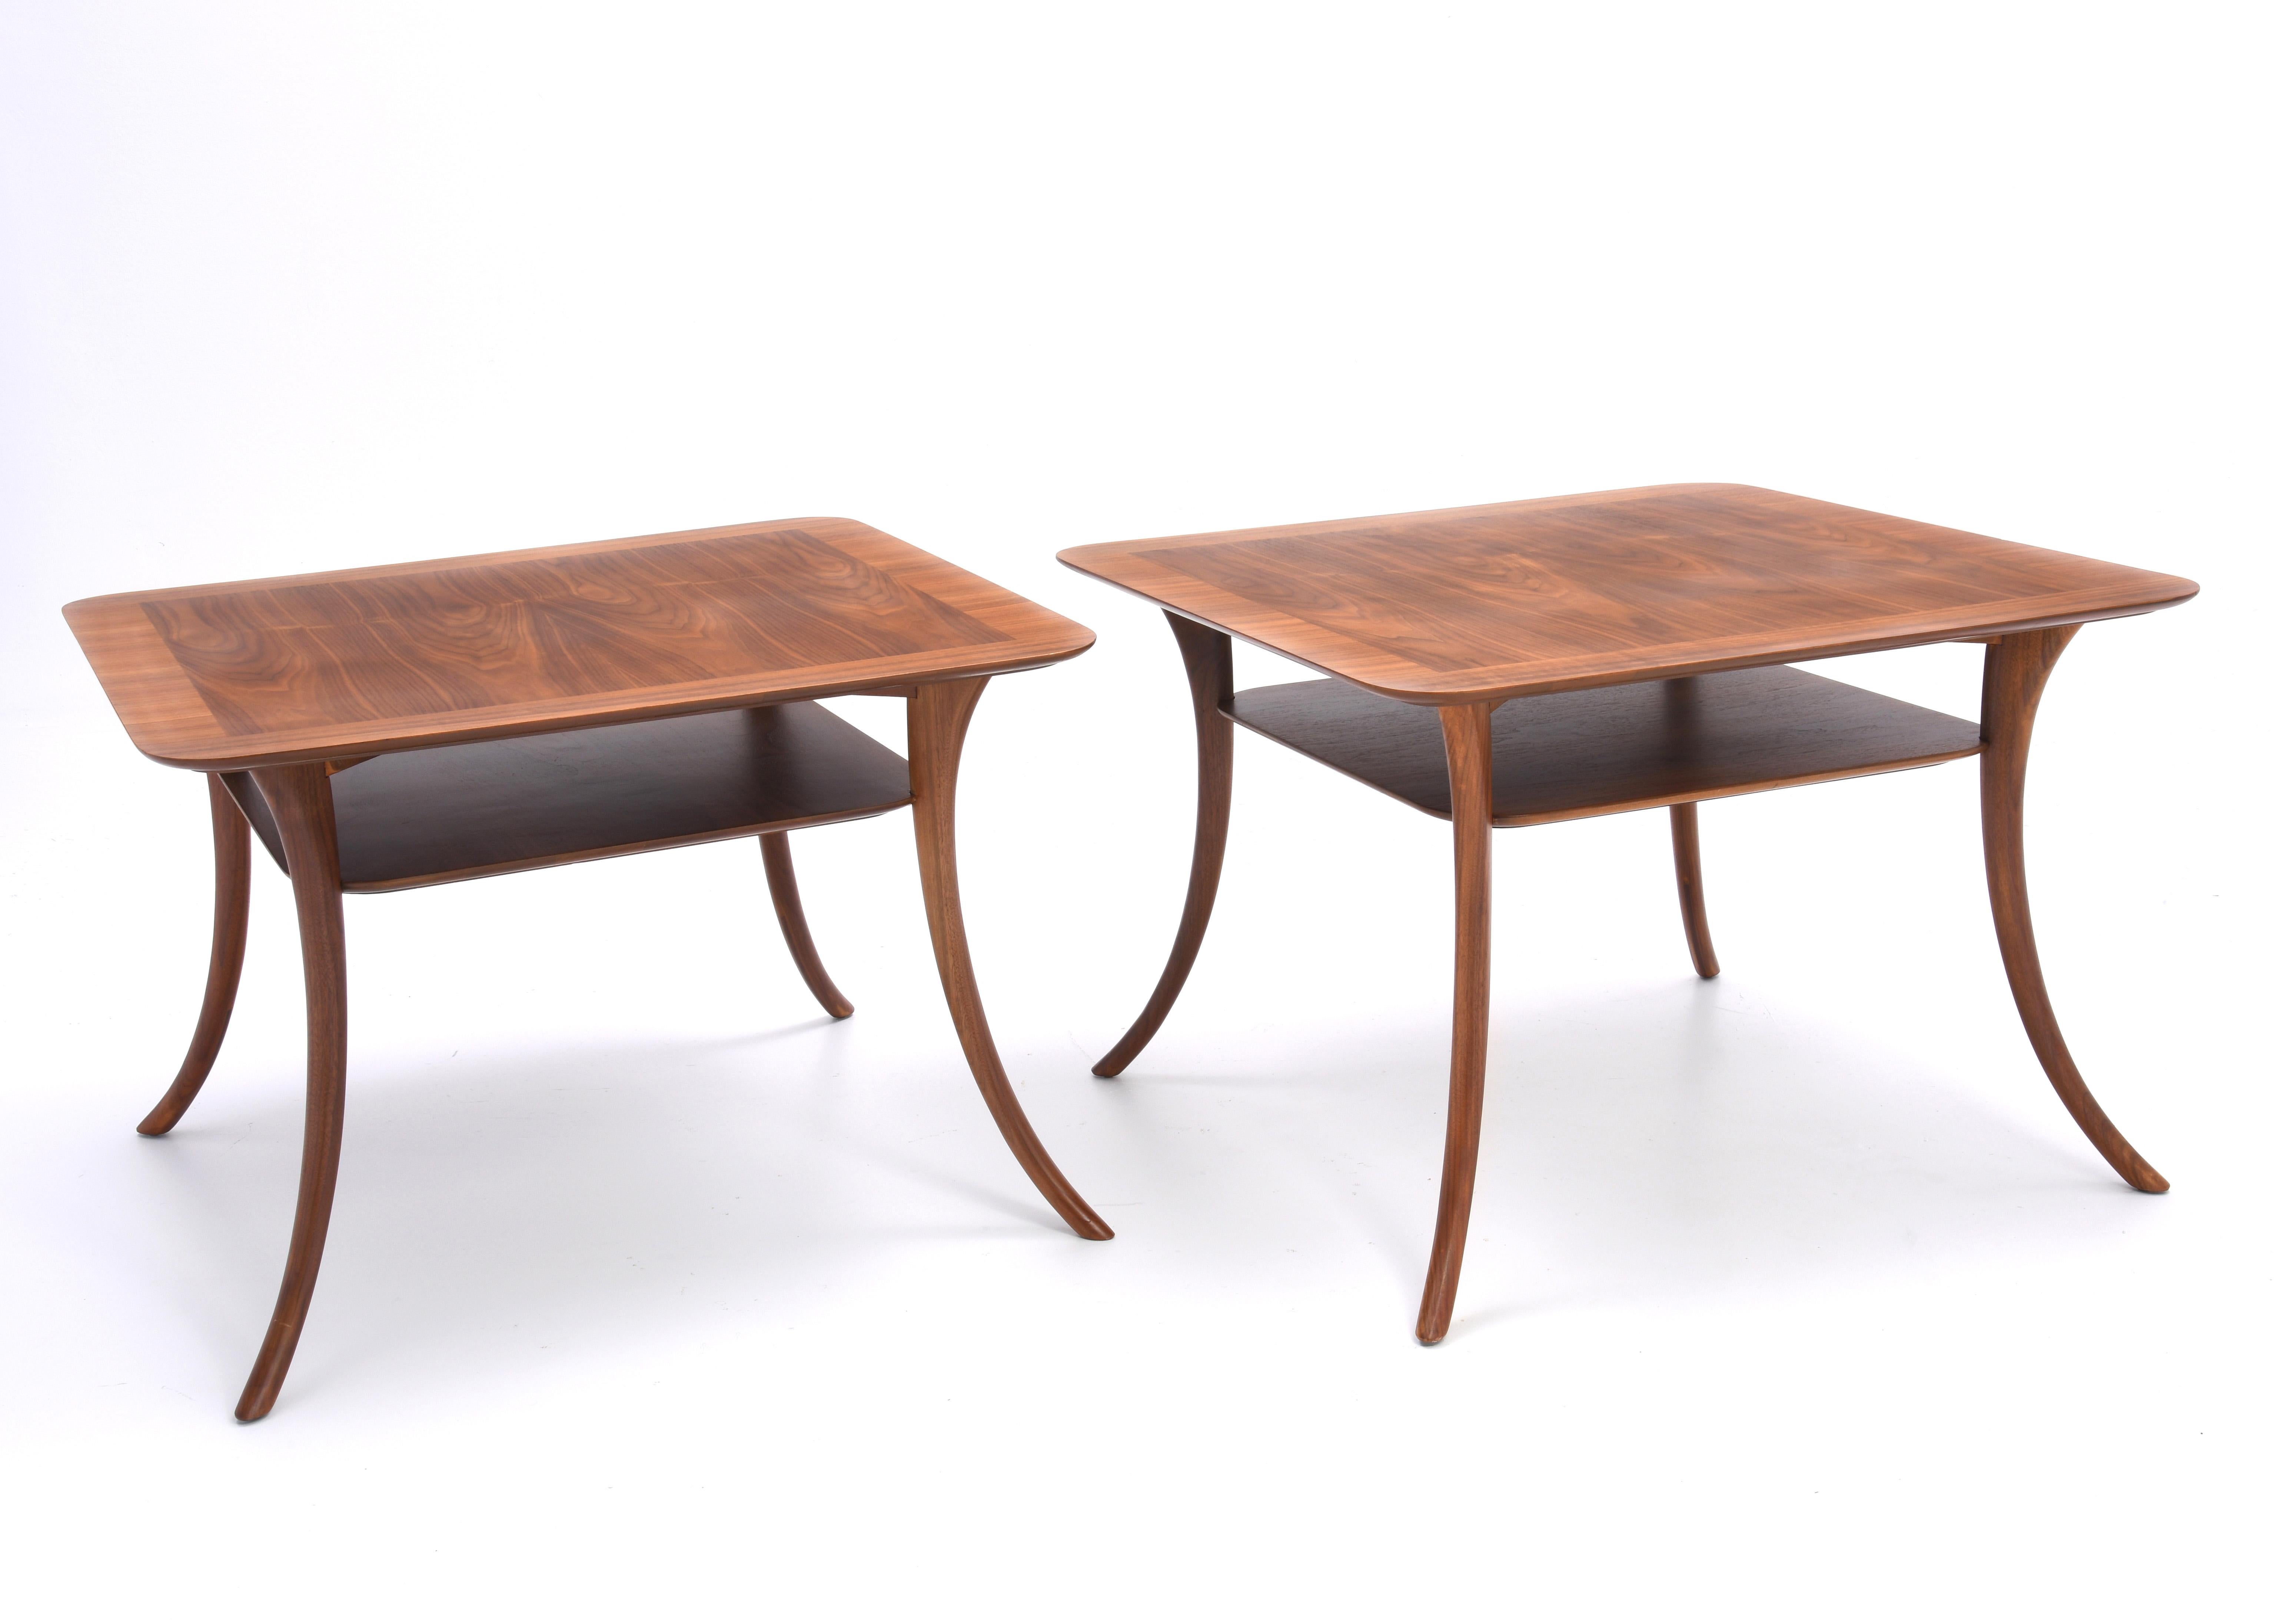 Mid-20th Century T.H. Robsjohn Gibbings Widdicomb Saber Leg Cocktail Side Tables 1957 - a Pair For Sale